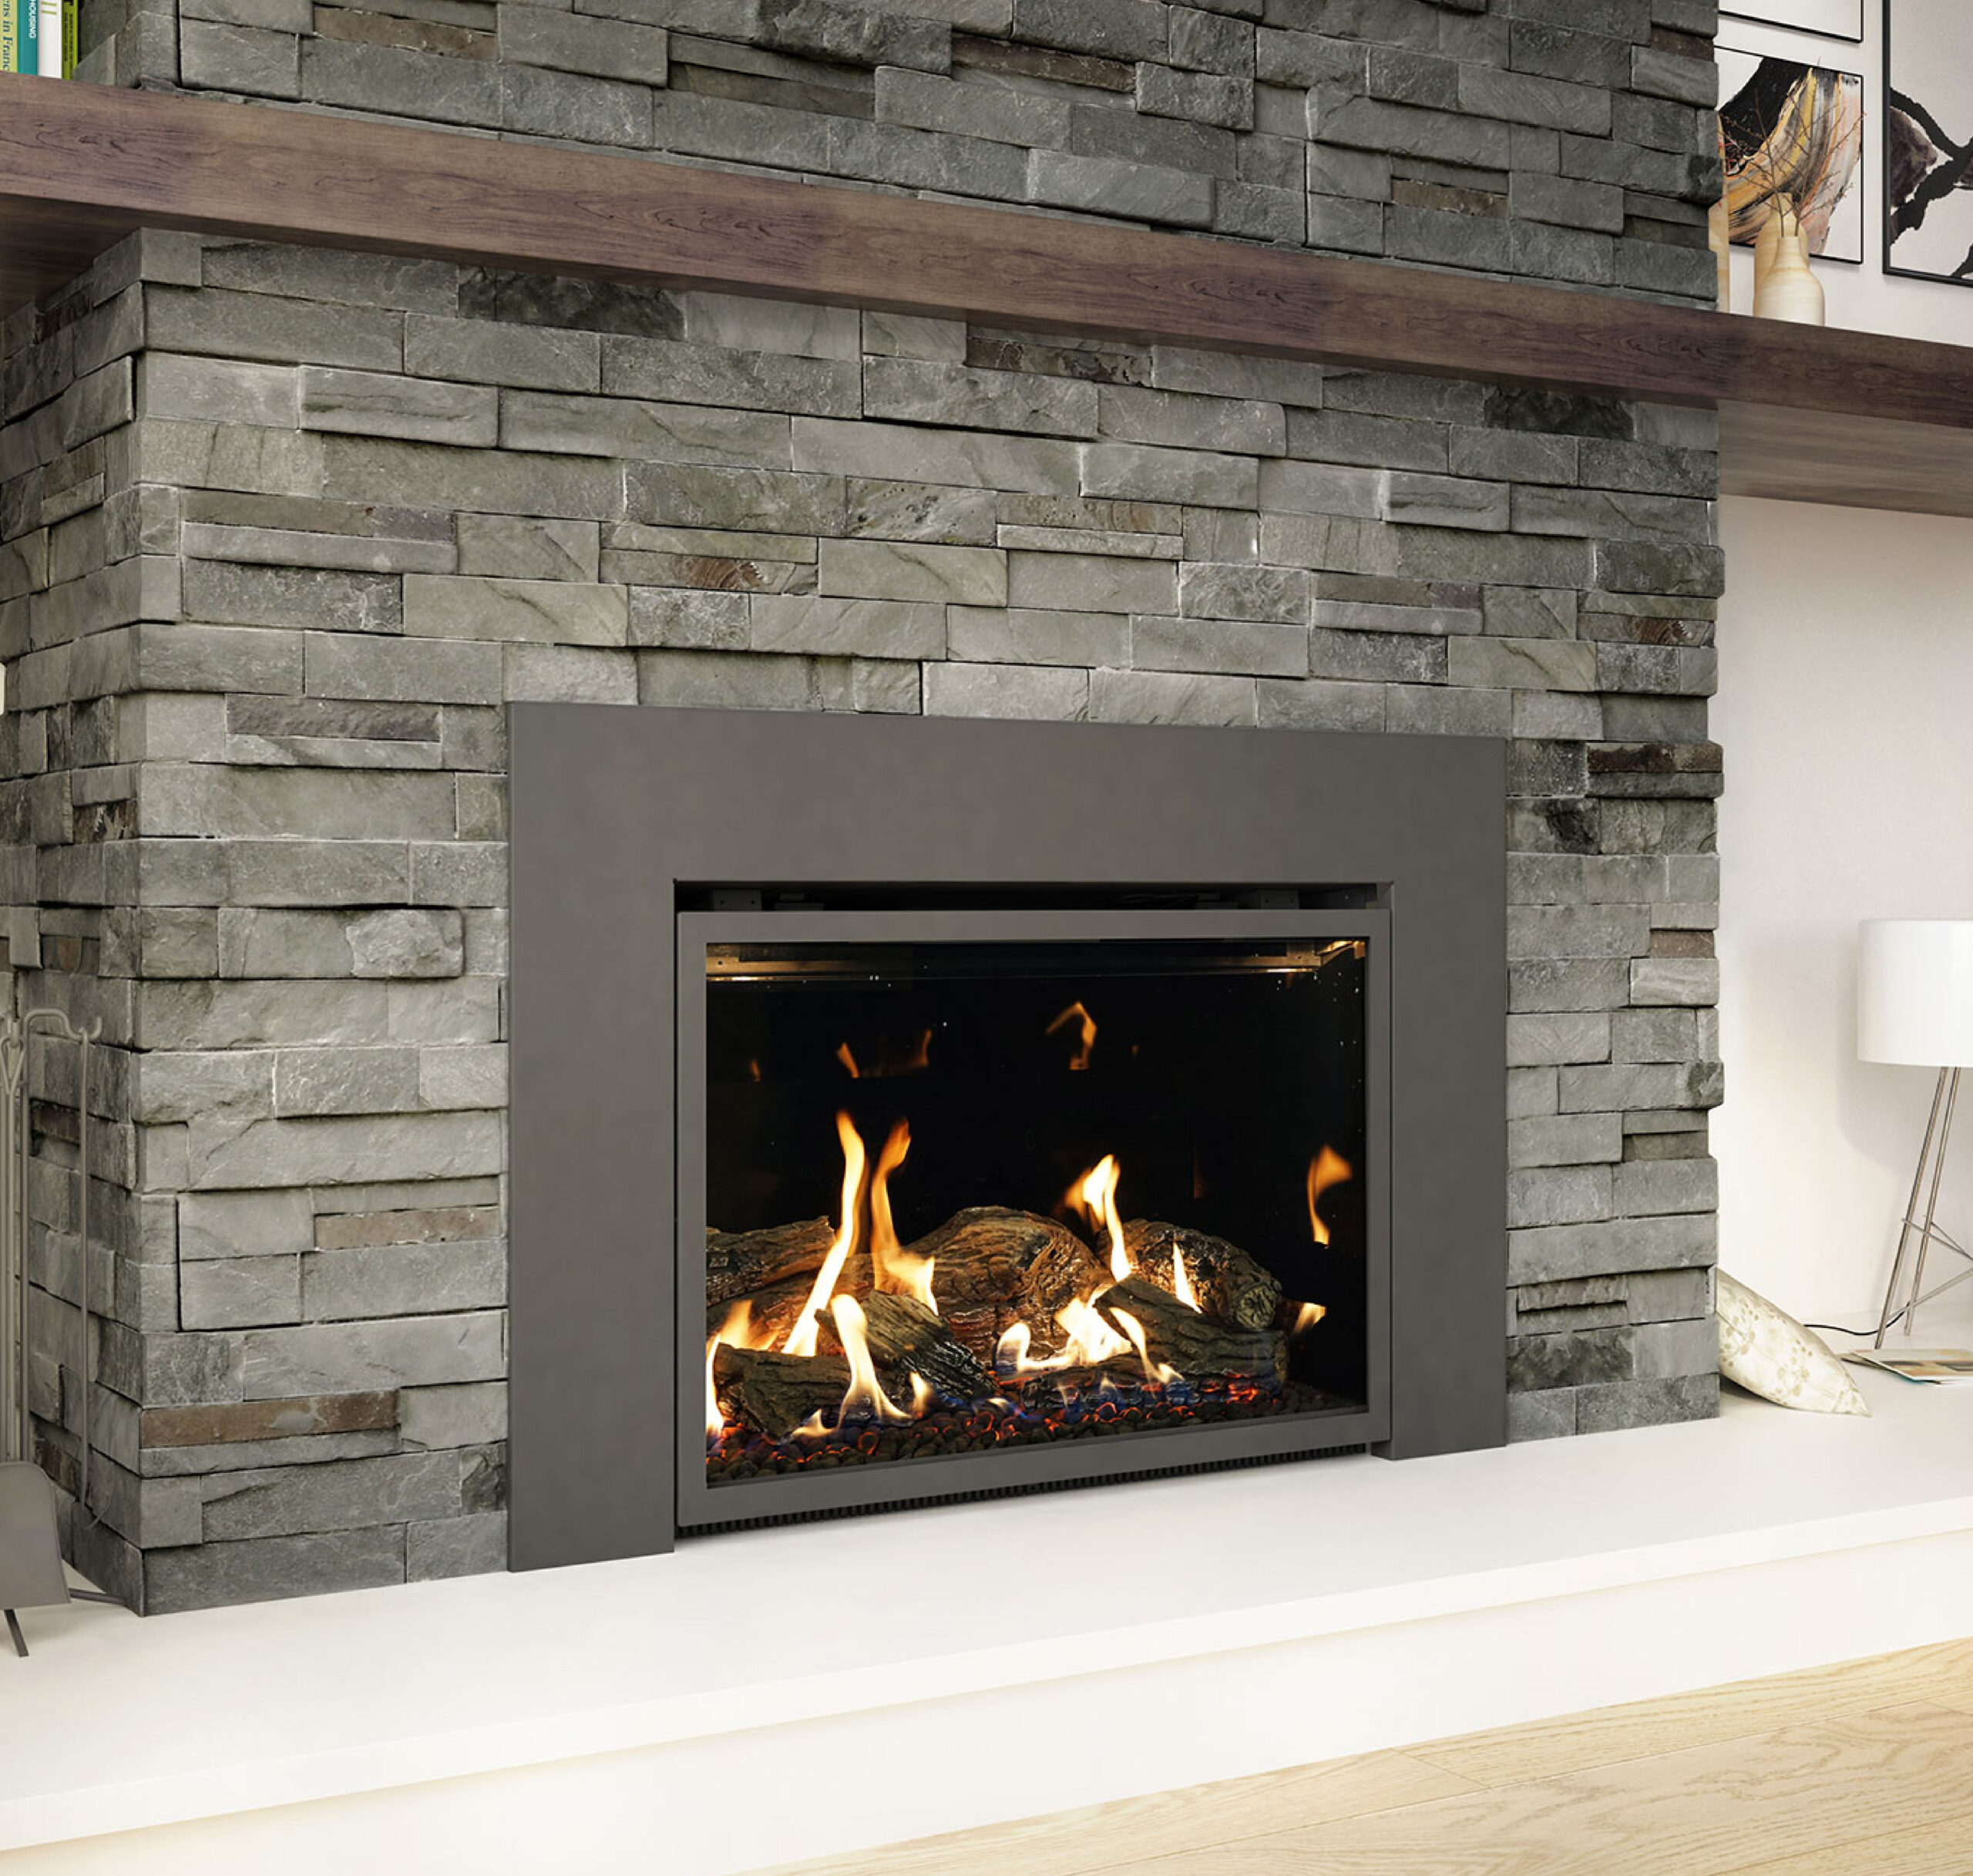 converting wood-burning fireplace to gas-fueled. Gas fireplace insert with gray stone surround and dark wood mantel.